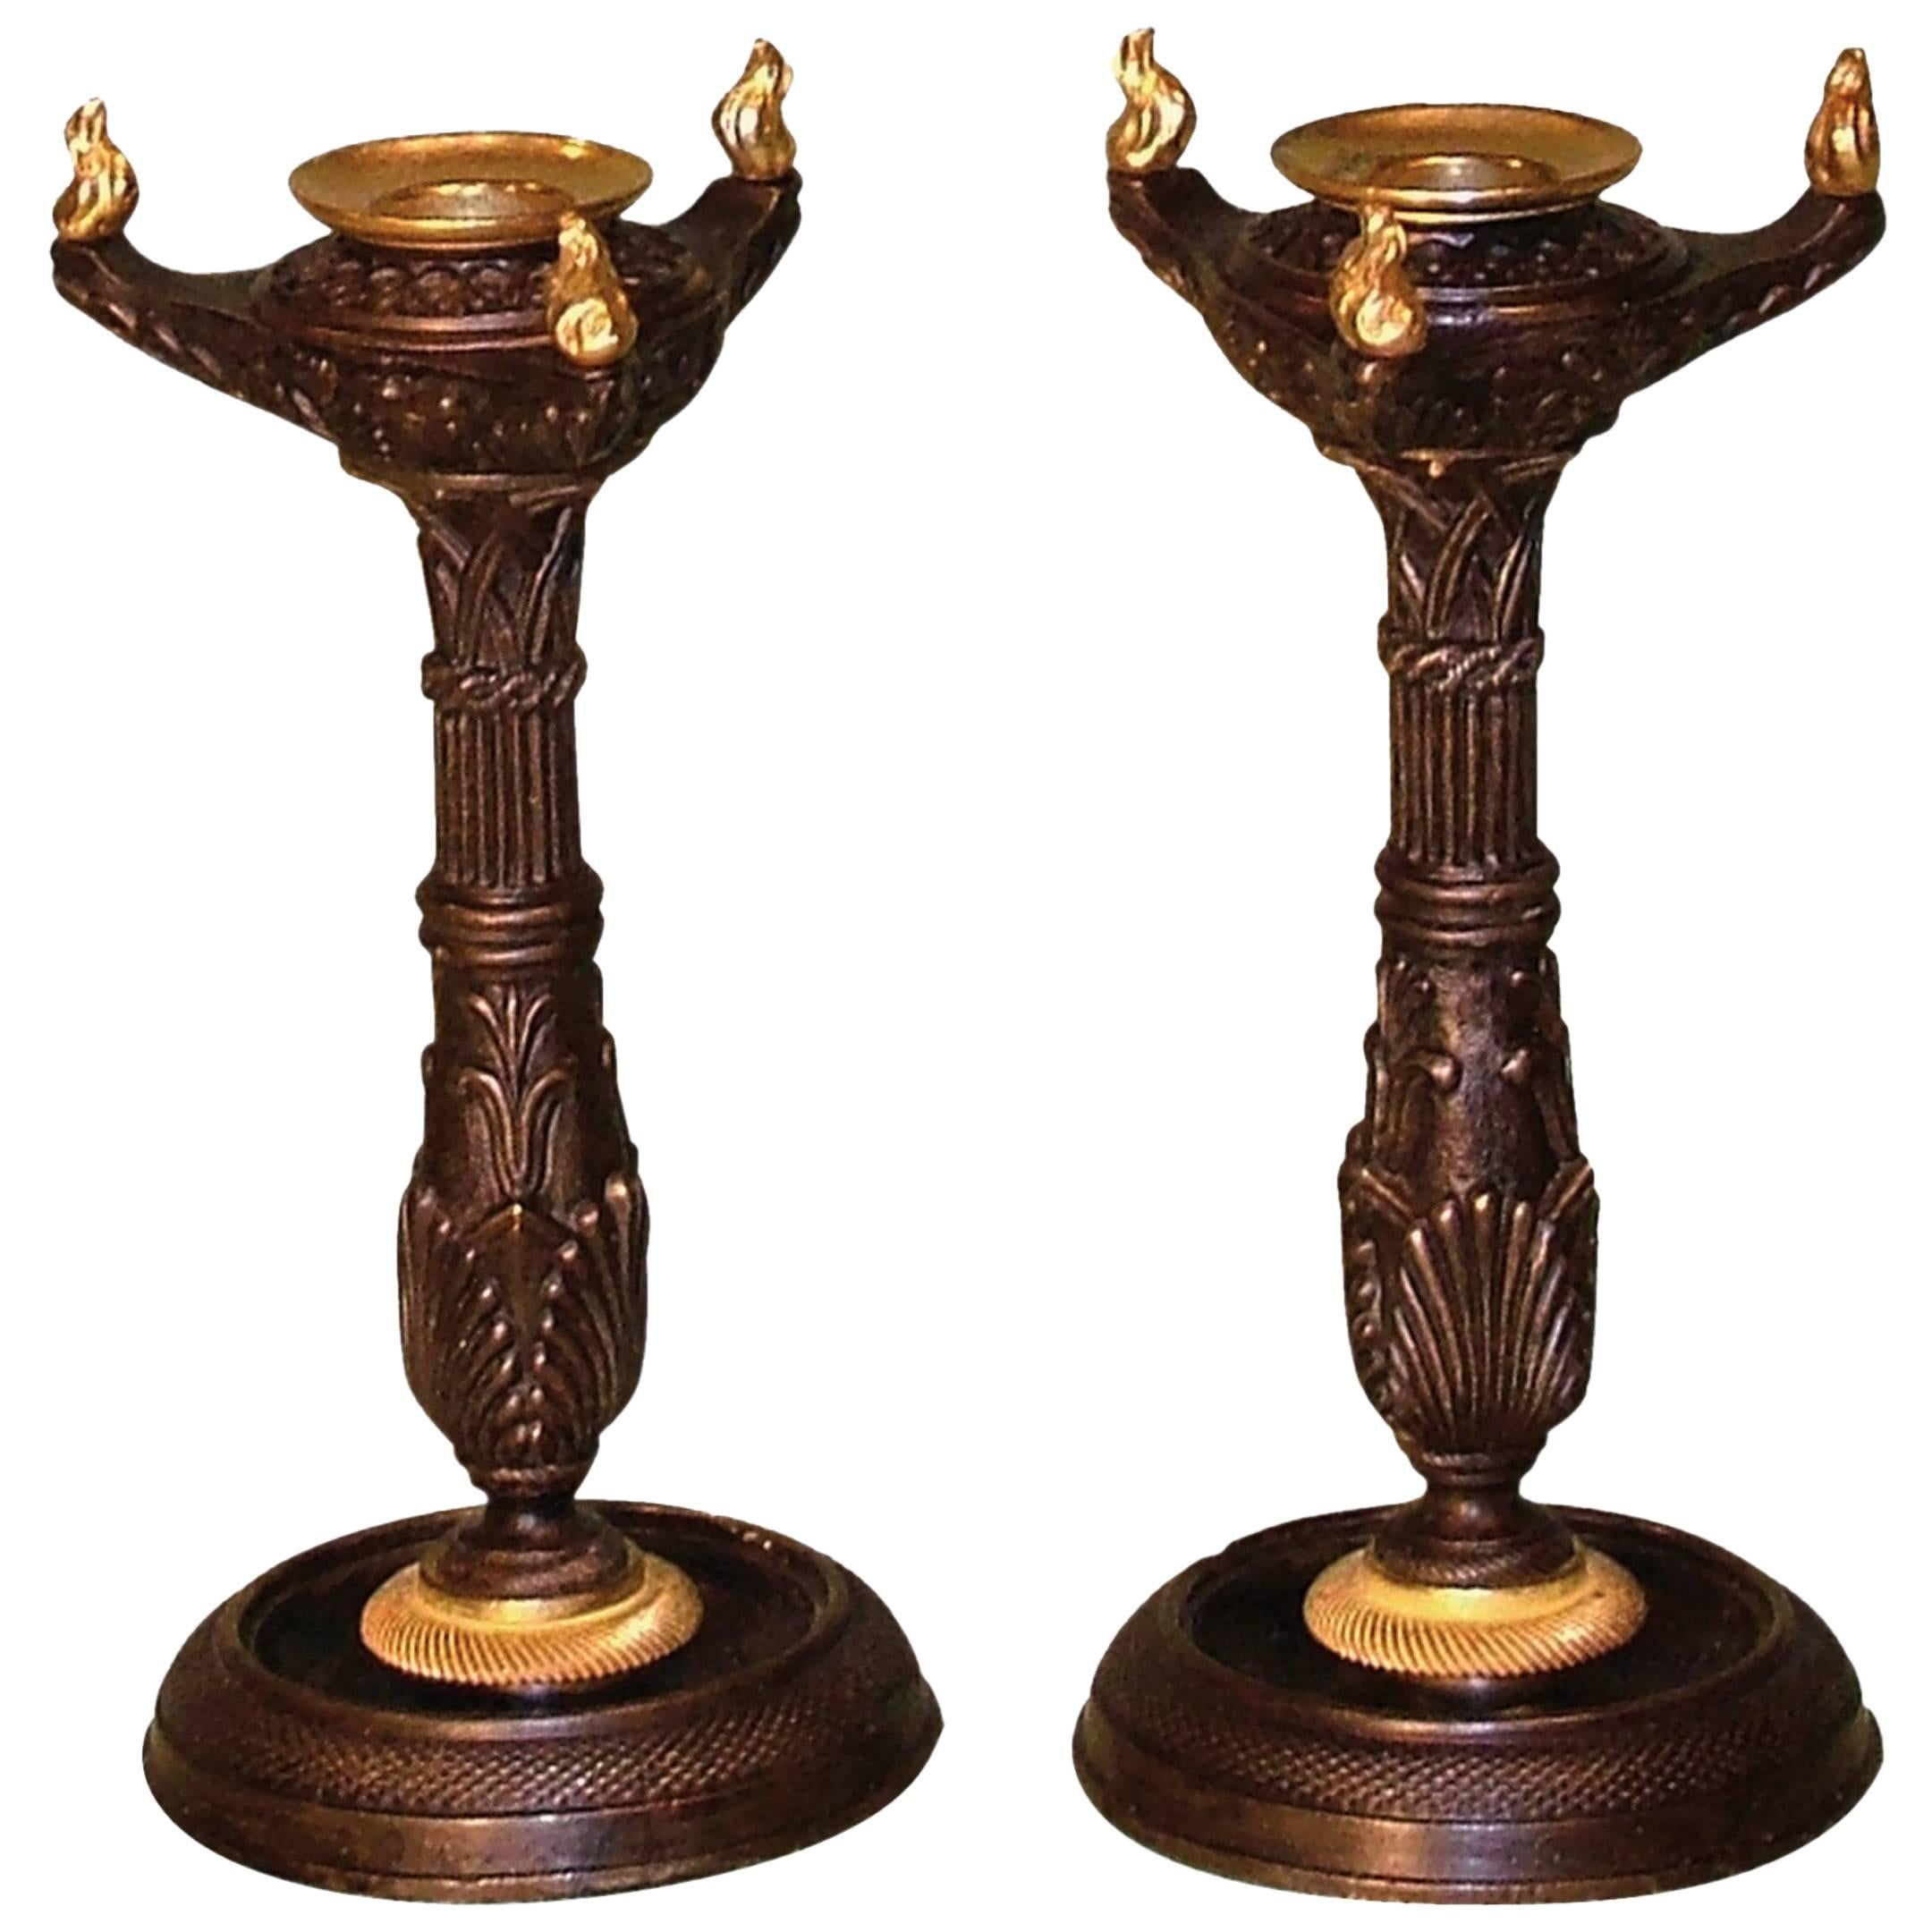 Regency period bronze and ormolu gothic candlesticks For Sale